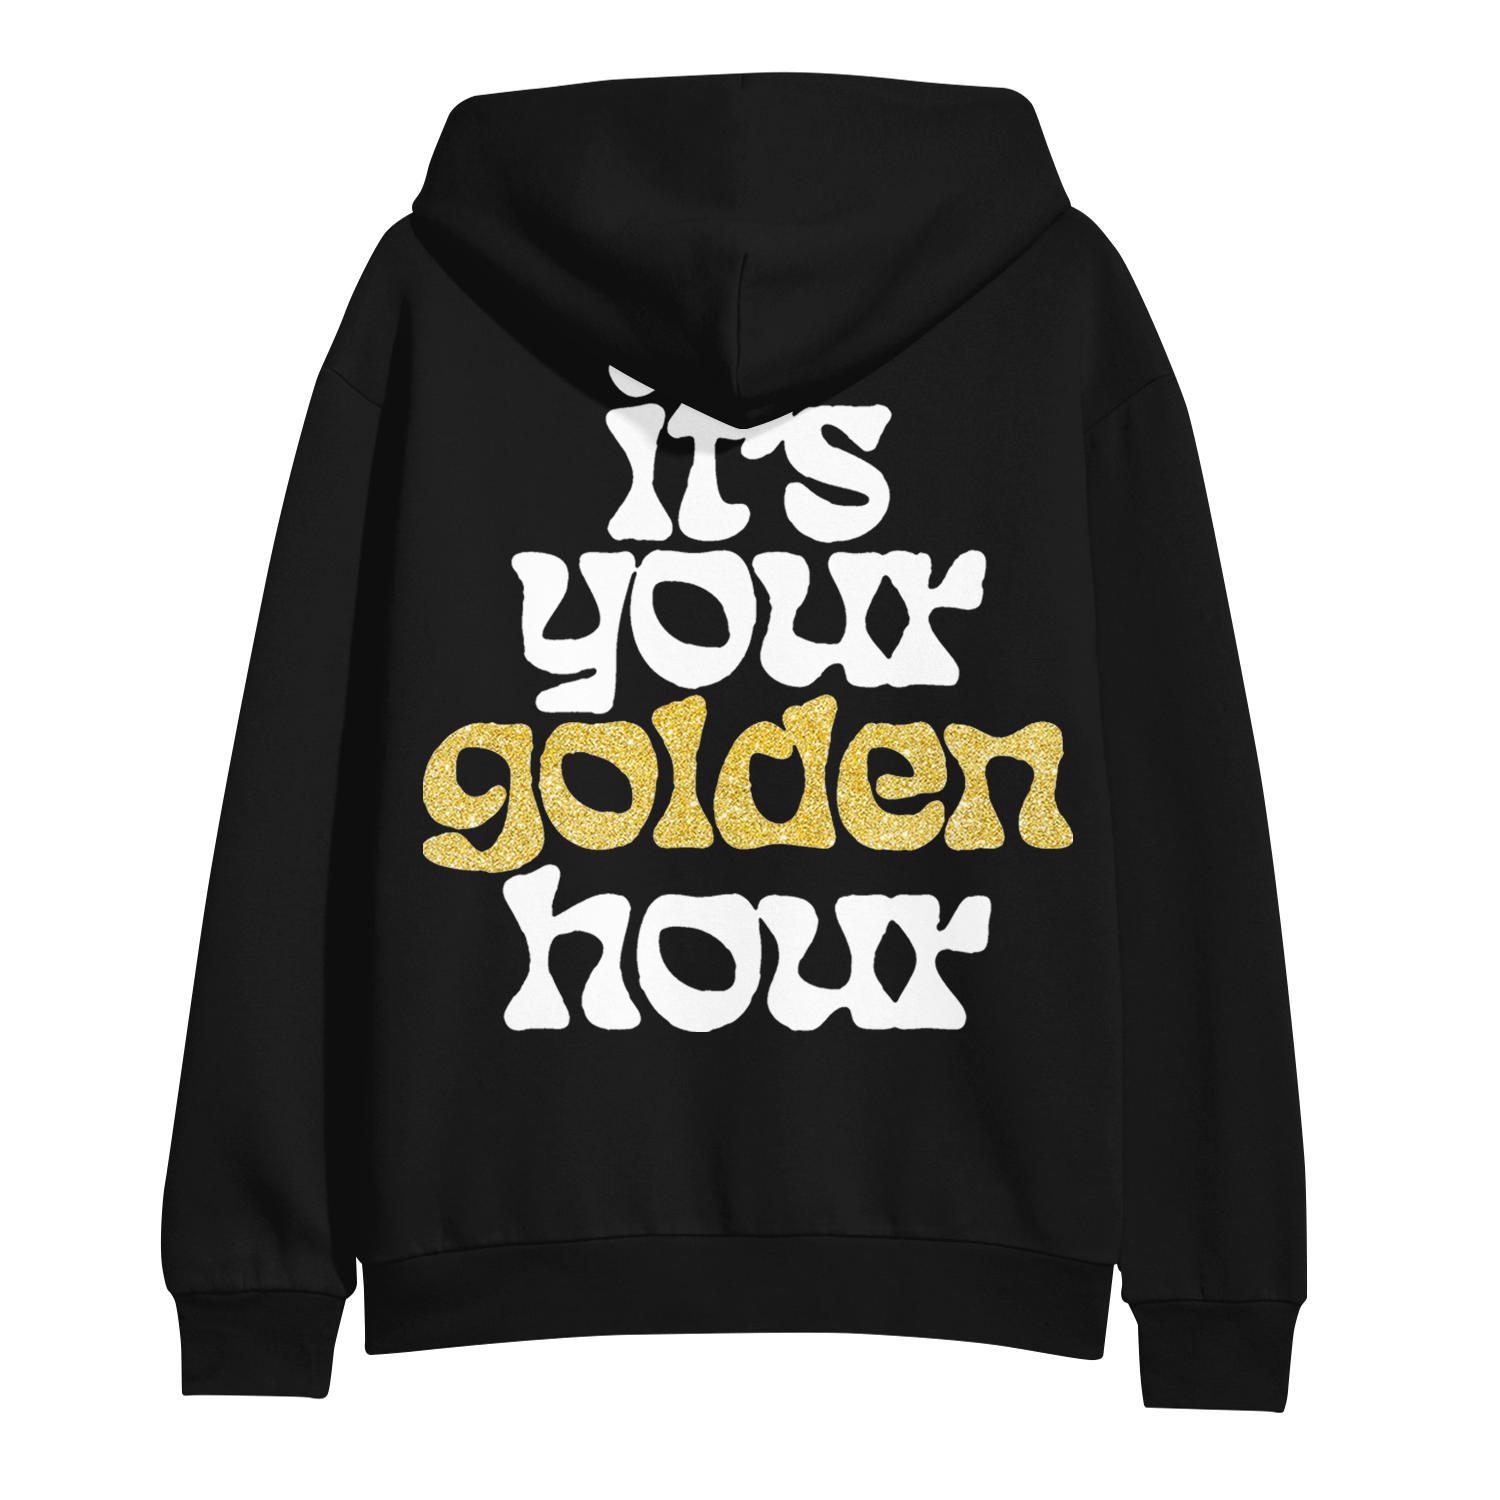 image of the back of a black pullover hooded sweatshirt on a gold background. full back print of stacked text that says it's your golden hour. the word golden is printed in gold color shimmer.